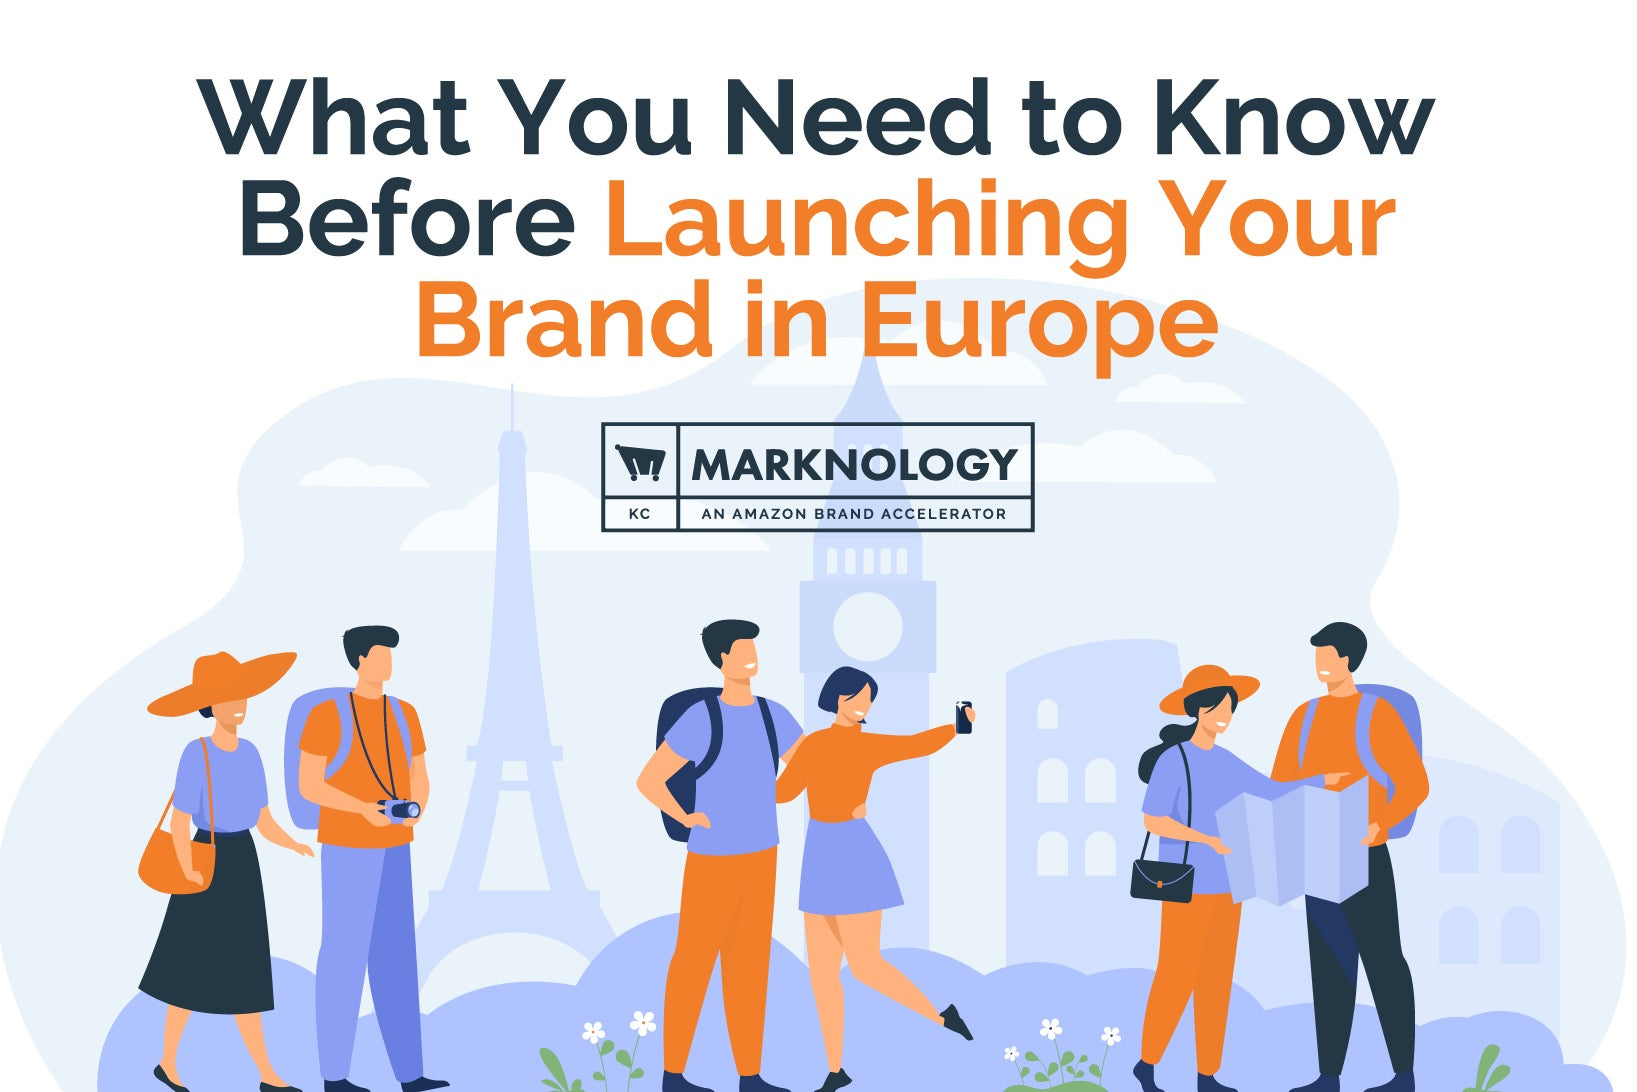 What You Need to Know Before Launching Your Brand in Europe